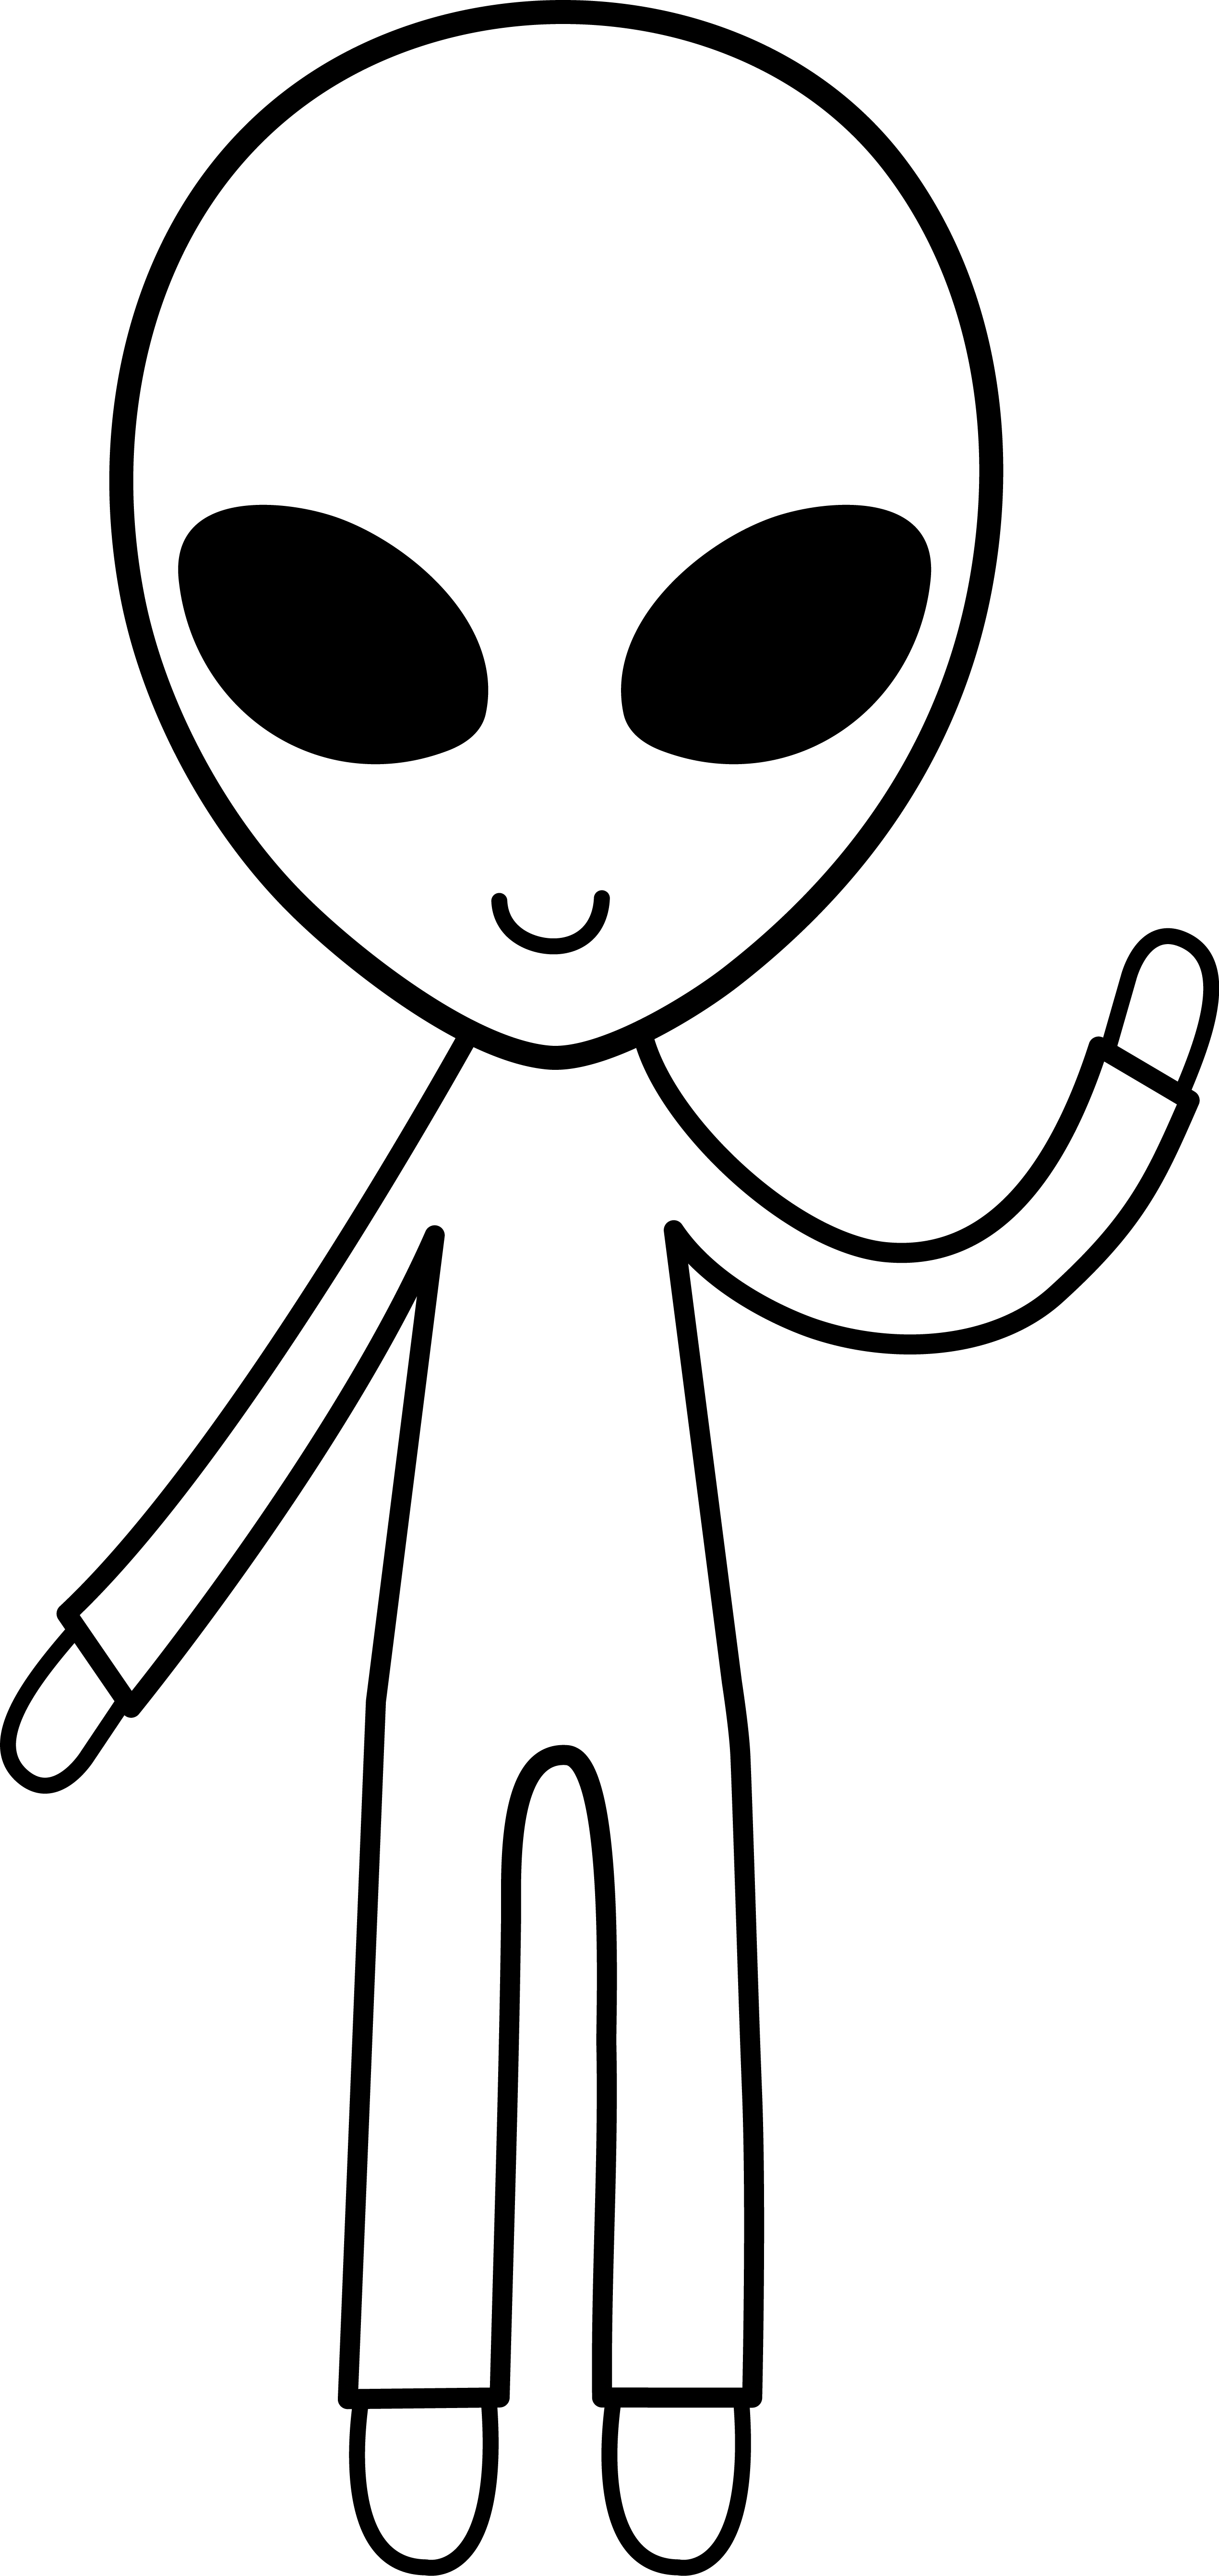 Alien Clip Art Free Images & Pictures - Becuo